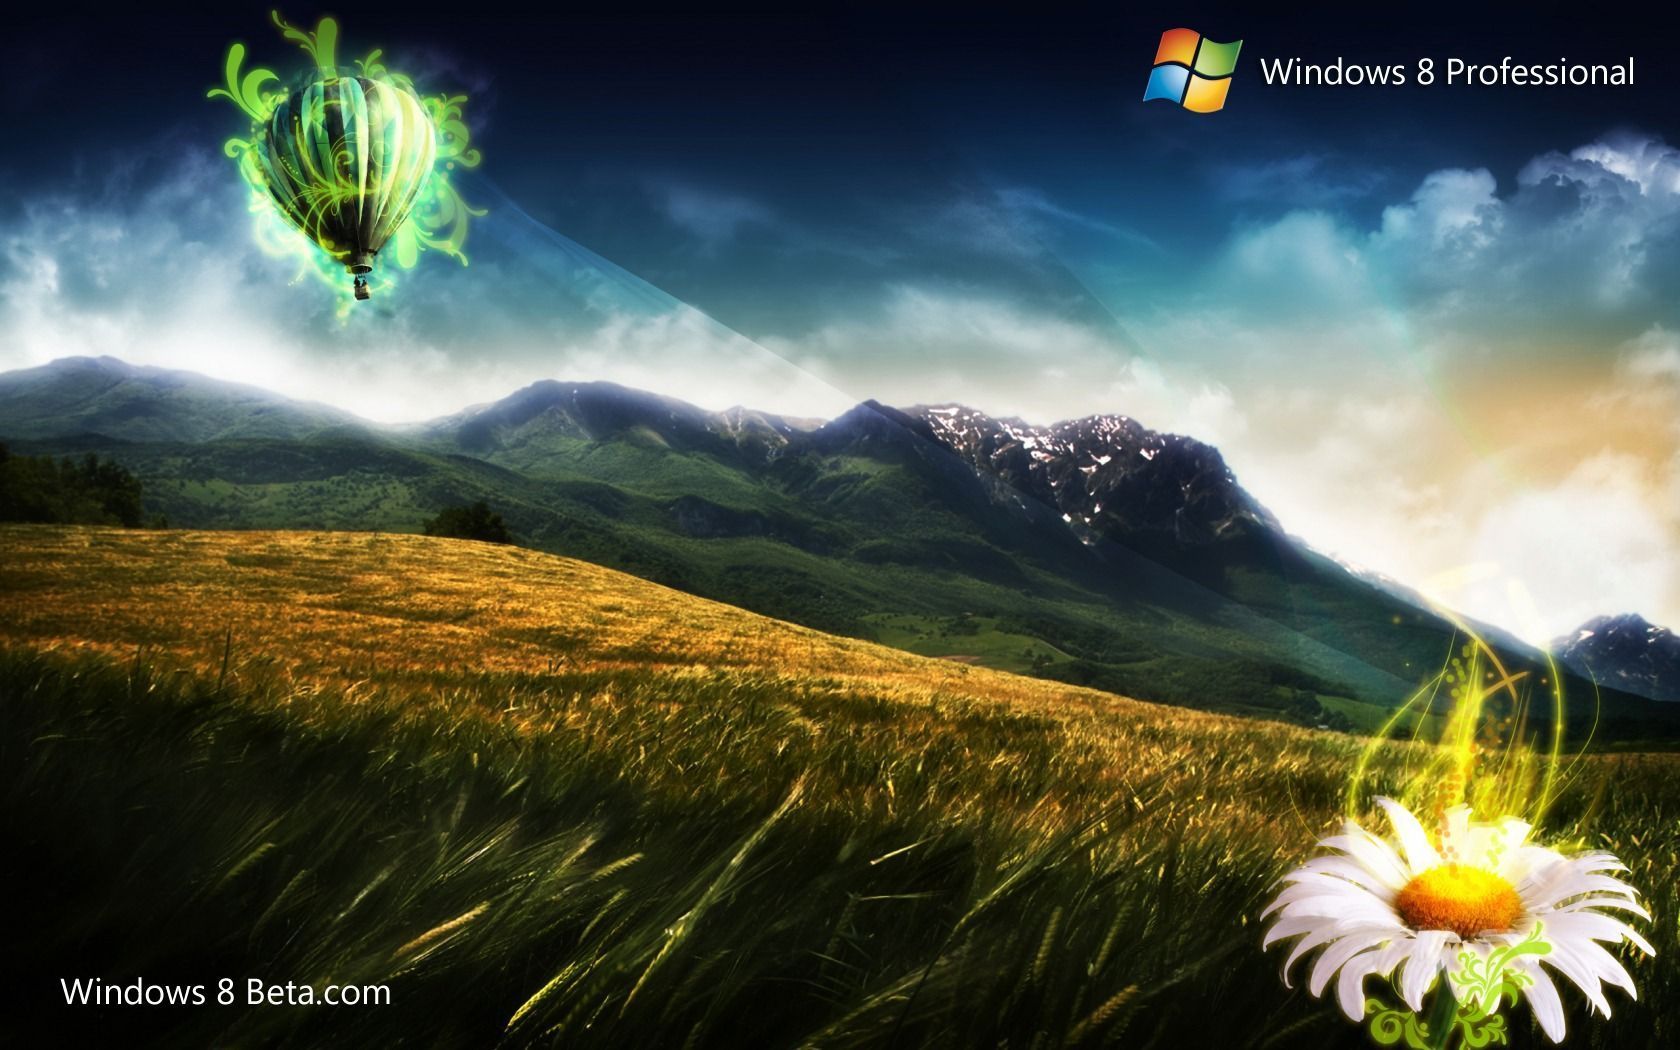 HD Wallpapers For Windows 8 - HD Images New